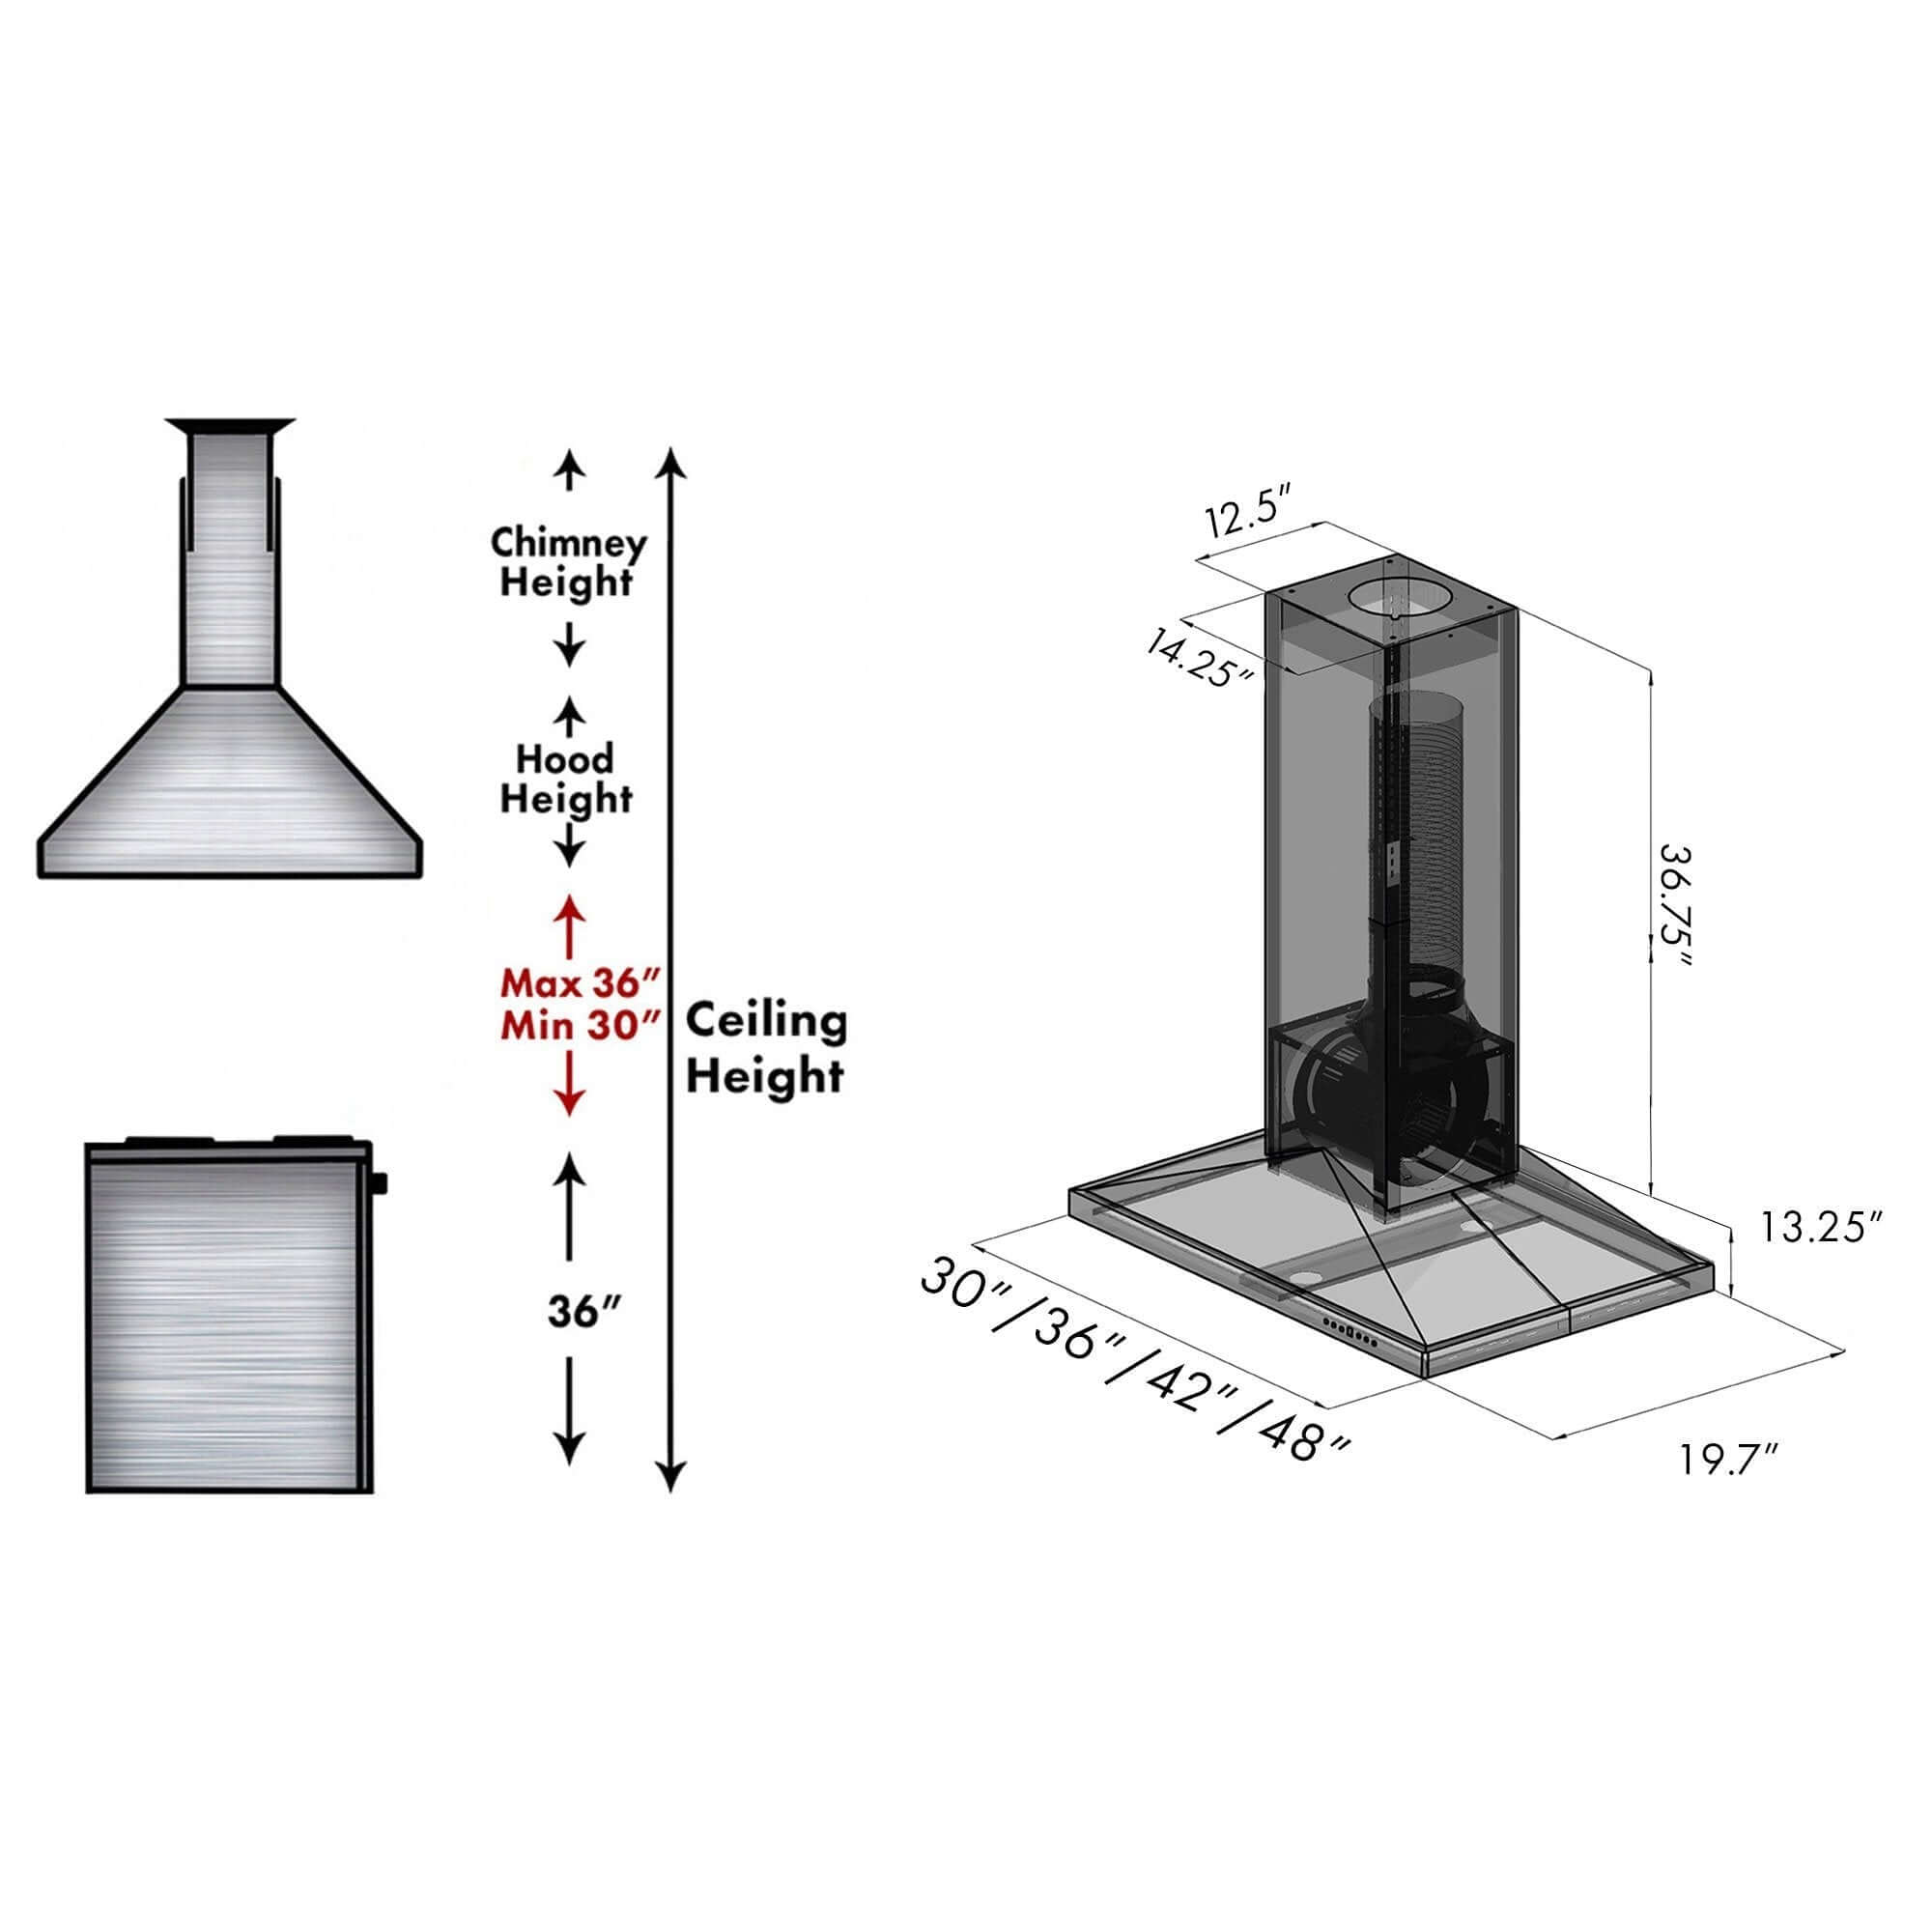 ZLINE Convertible Vent Wooden Island Mount Range Hood in Walnut (KBiRR) chimney height guide and dimensional measurements.